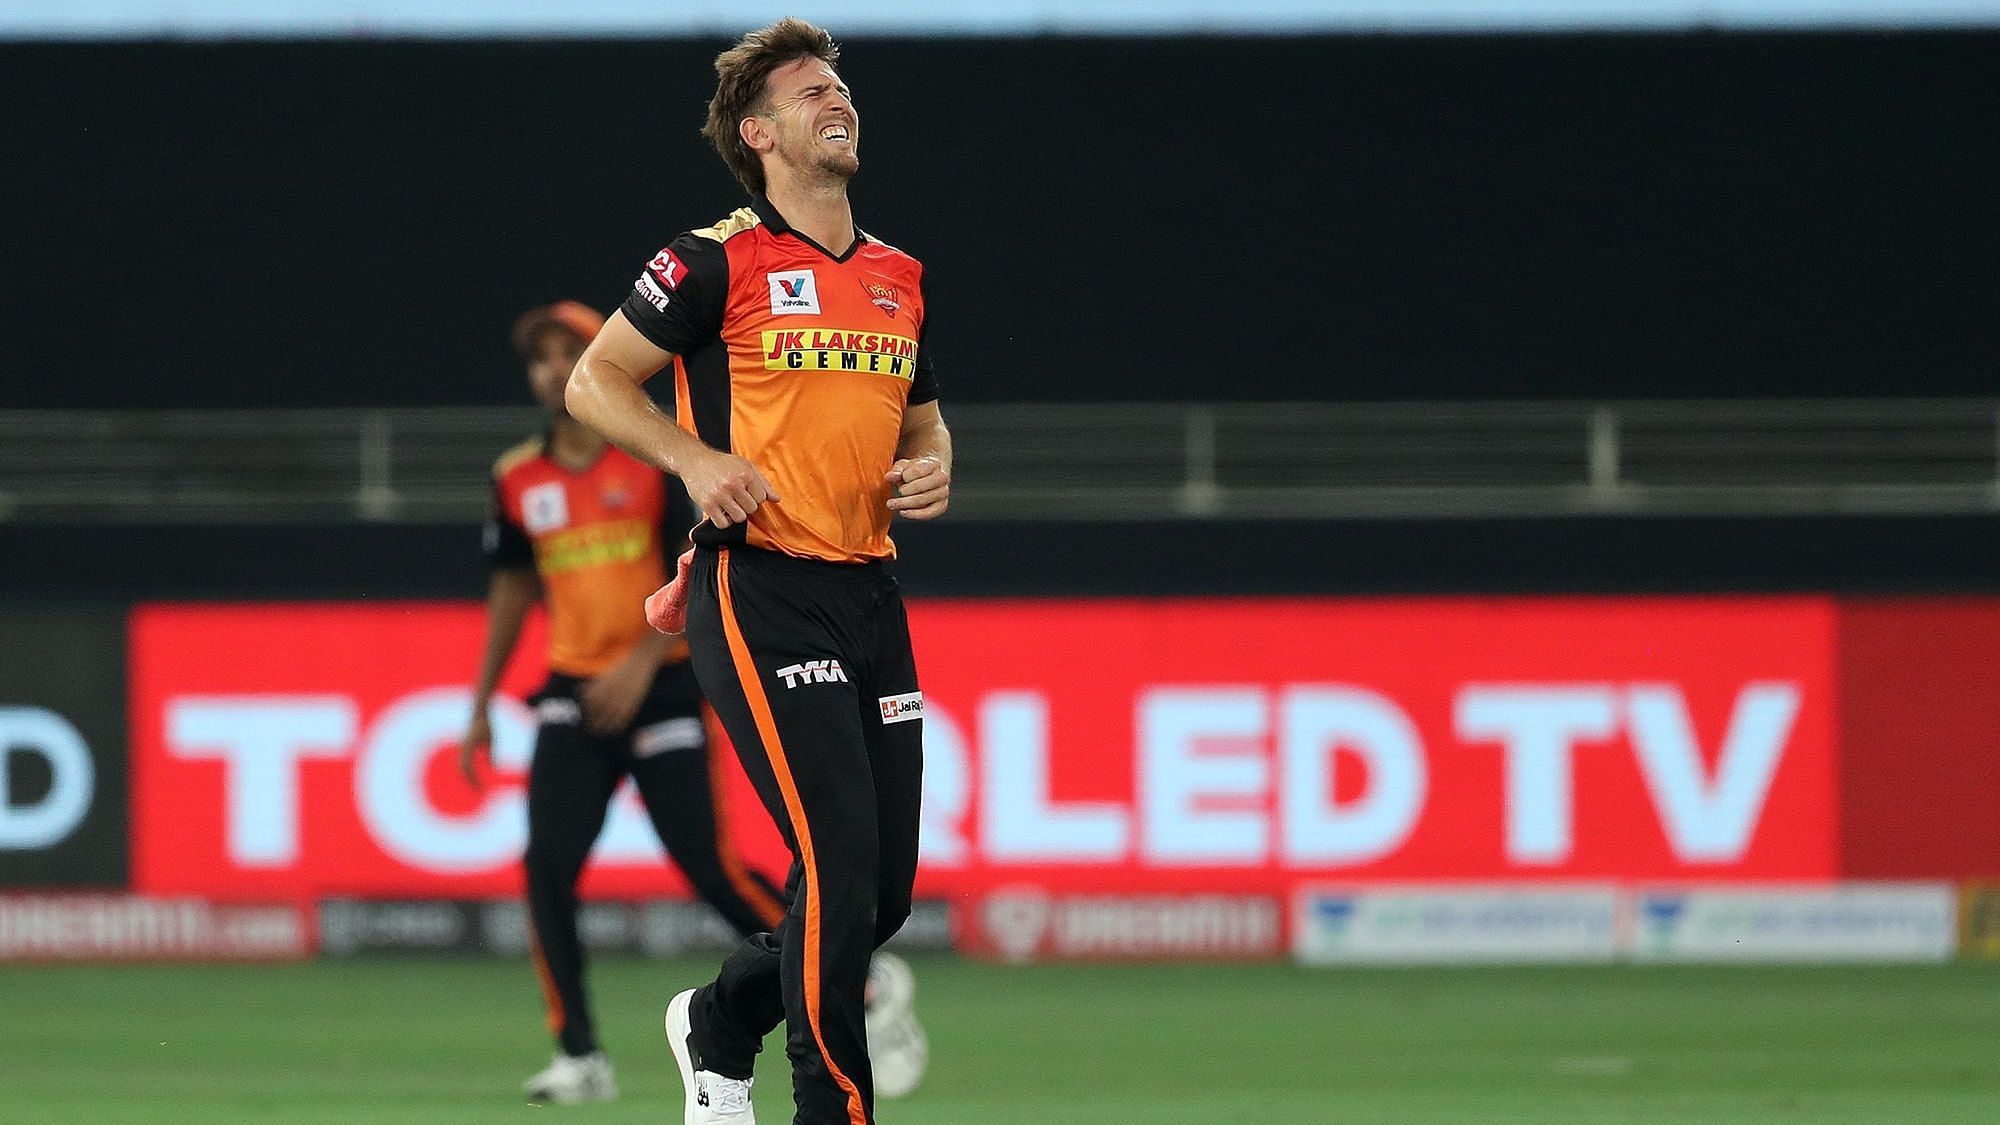 Sunrisers Hyderabad all-rounder Mitchell Marsh sprained his ankle in his first over of the match against RCB on Monday.